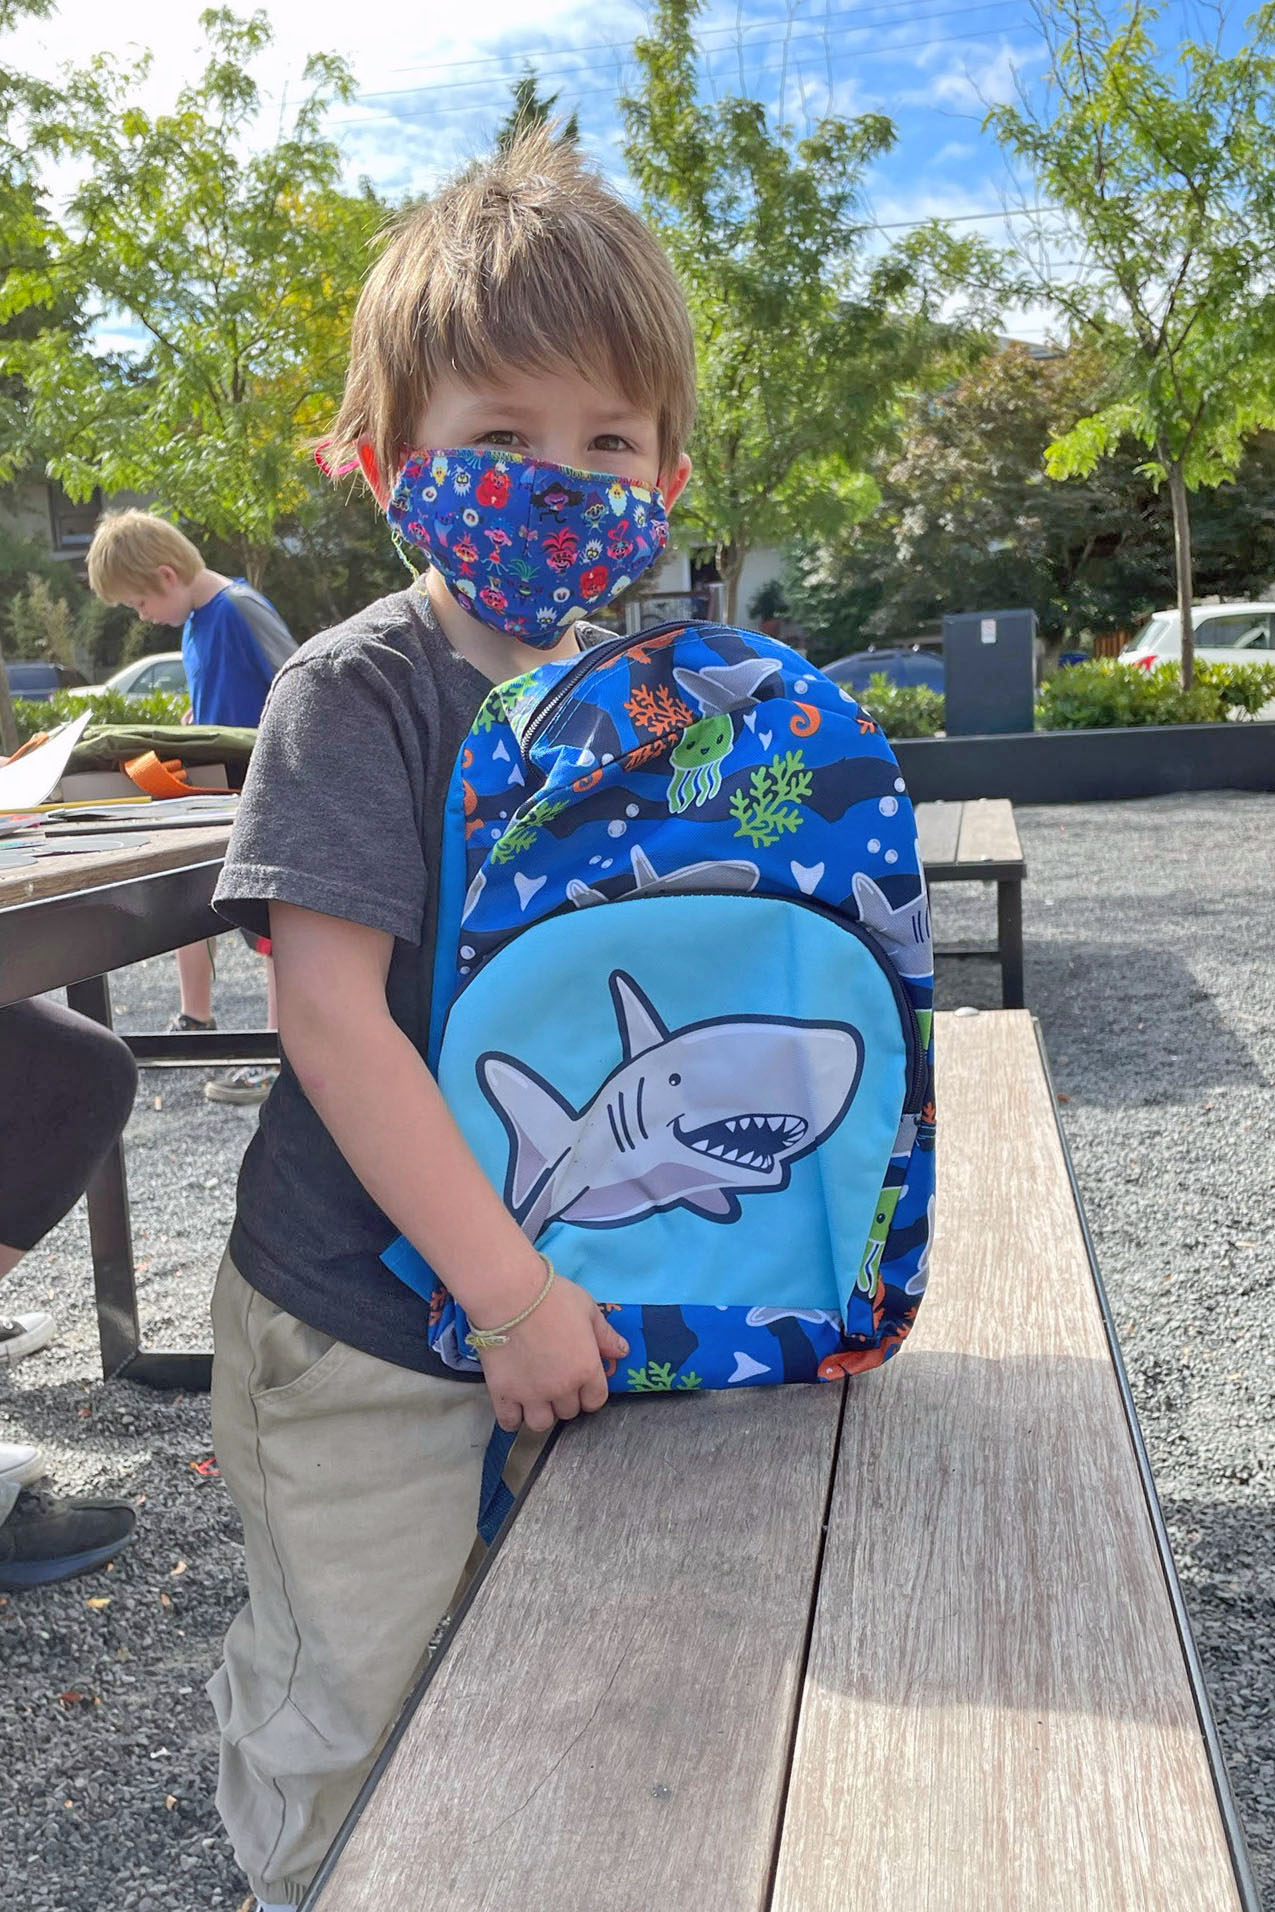 A young boy wears a face mask and holds up a backpack with a cartoon shark